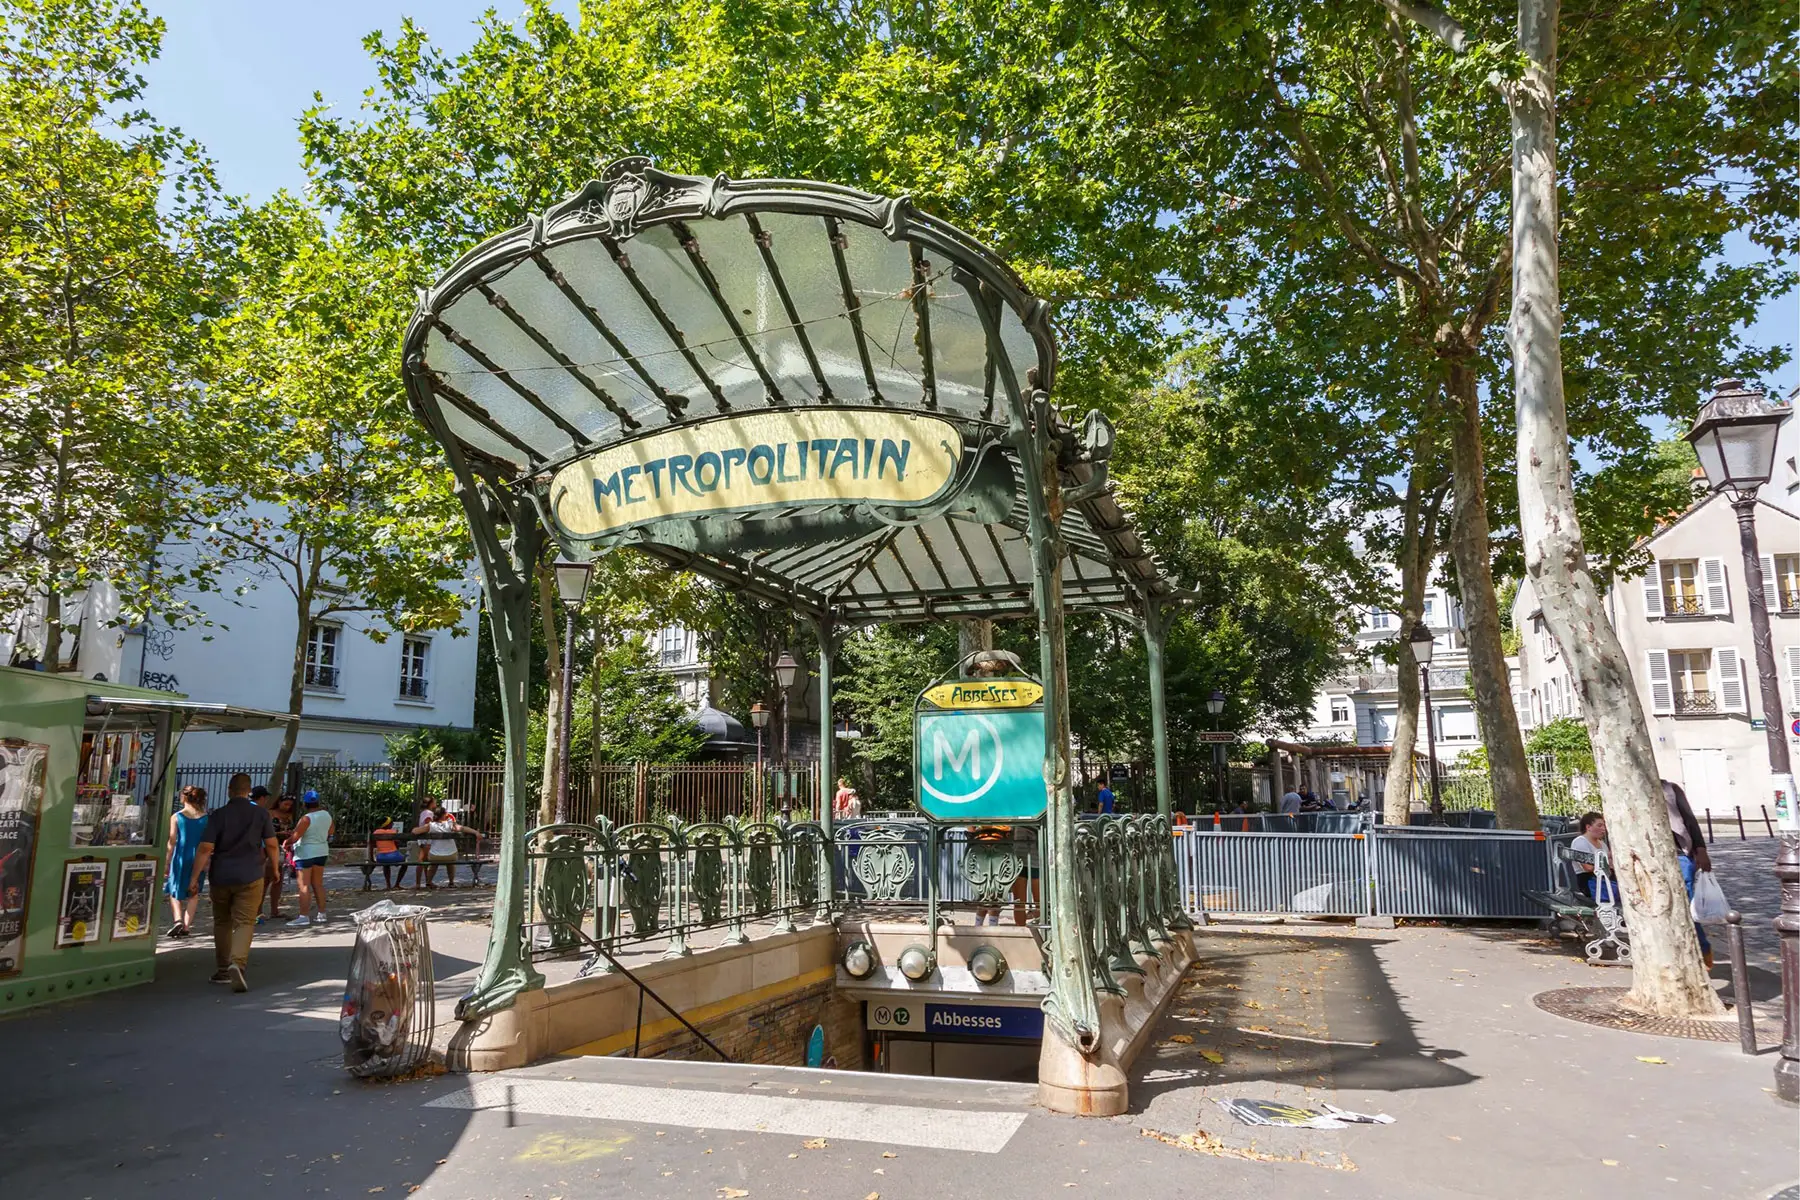 Entrance to Abbesses station on the Paris Metro